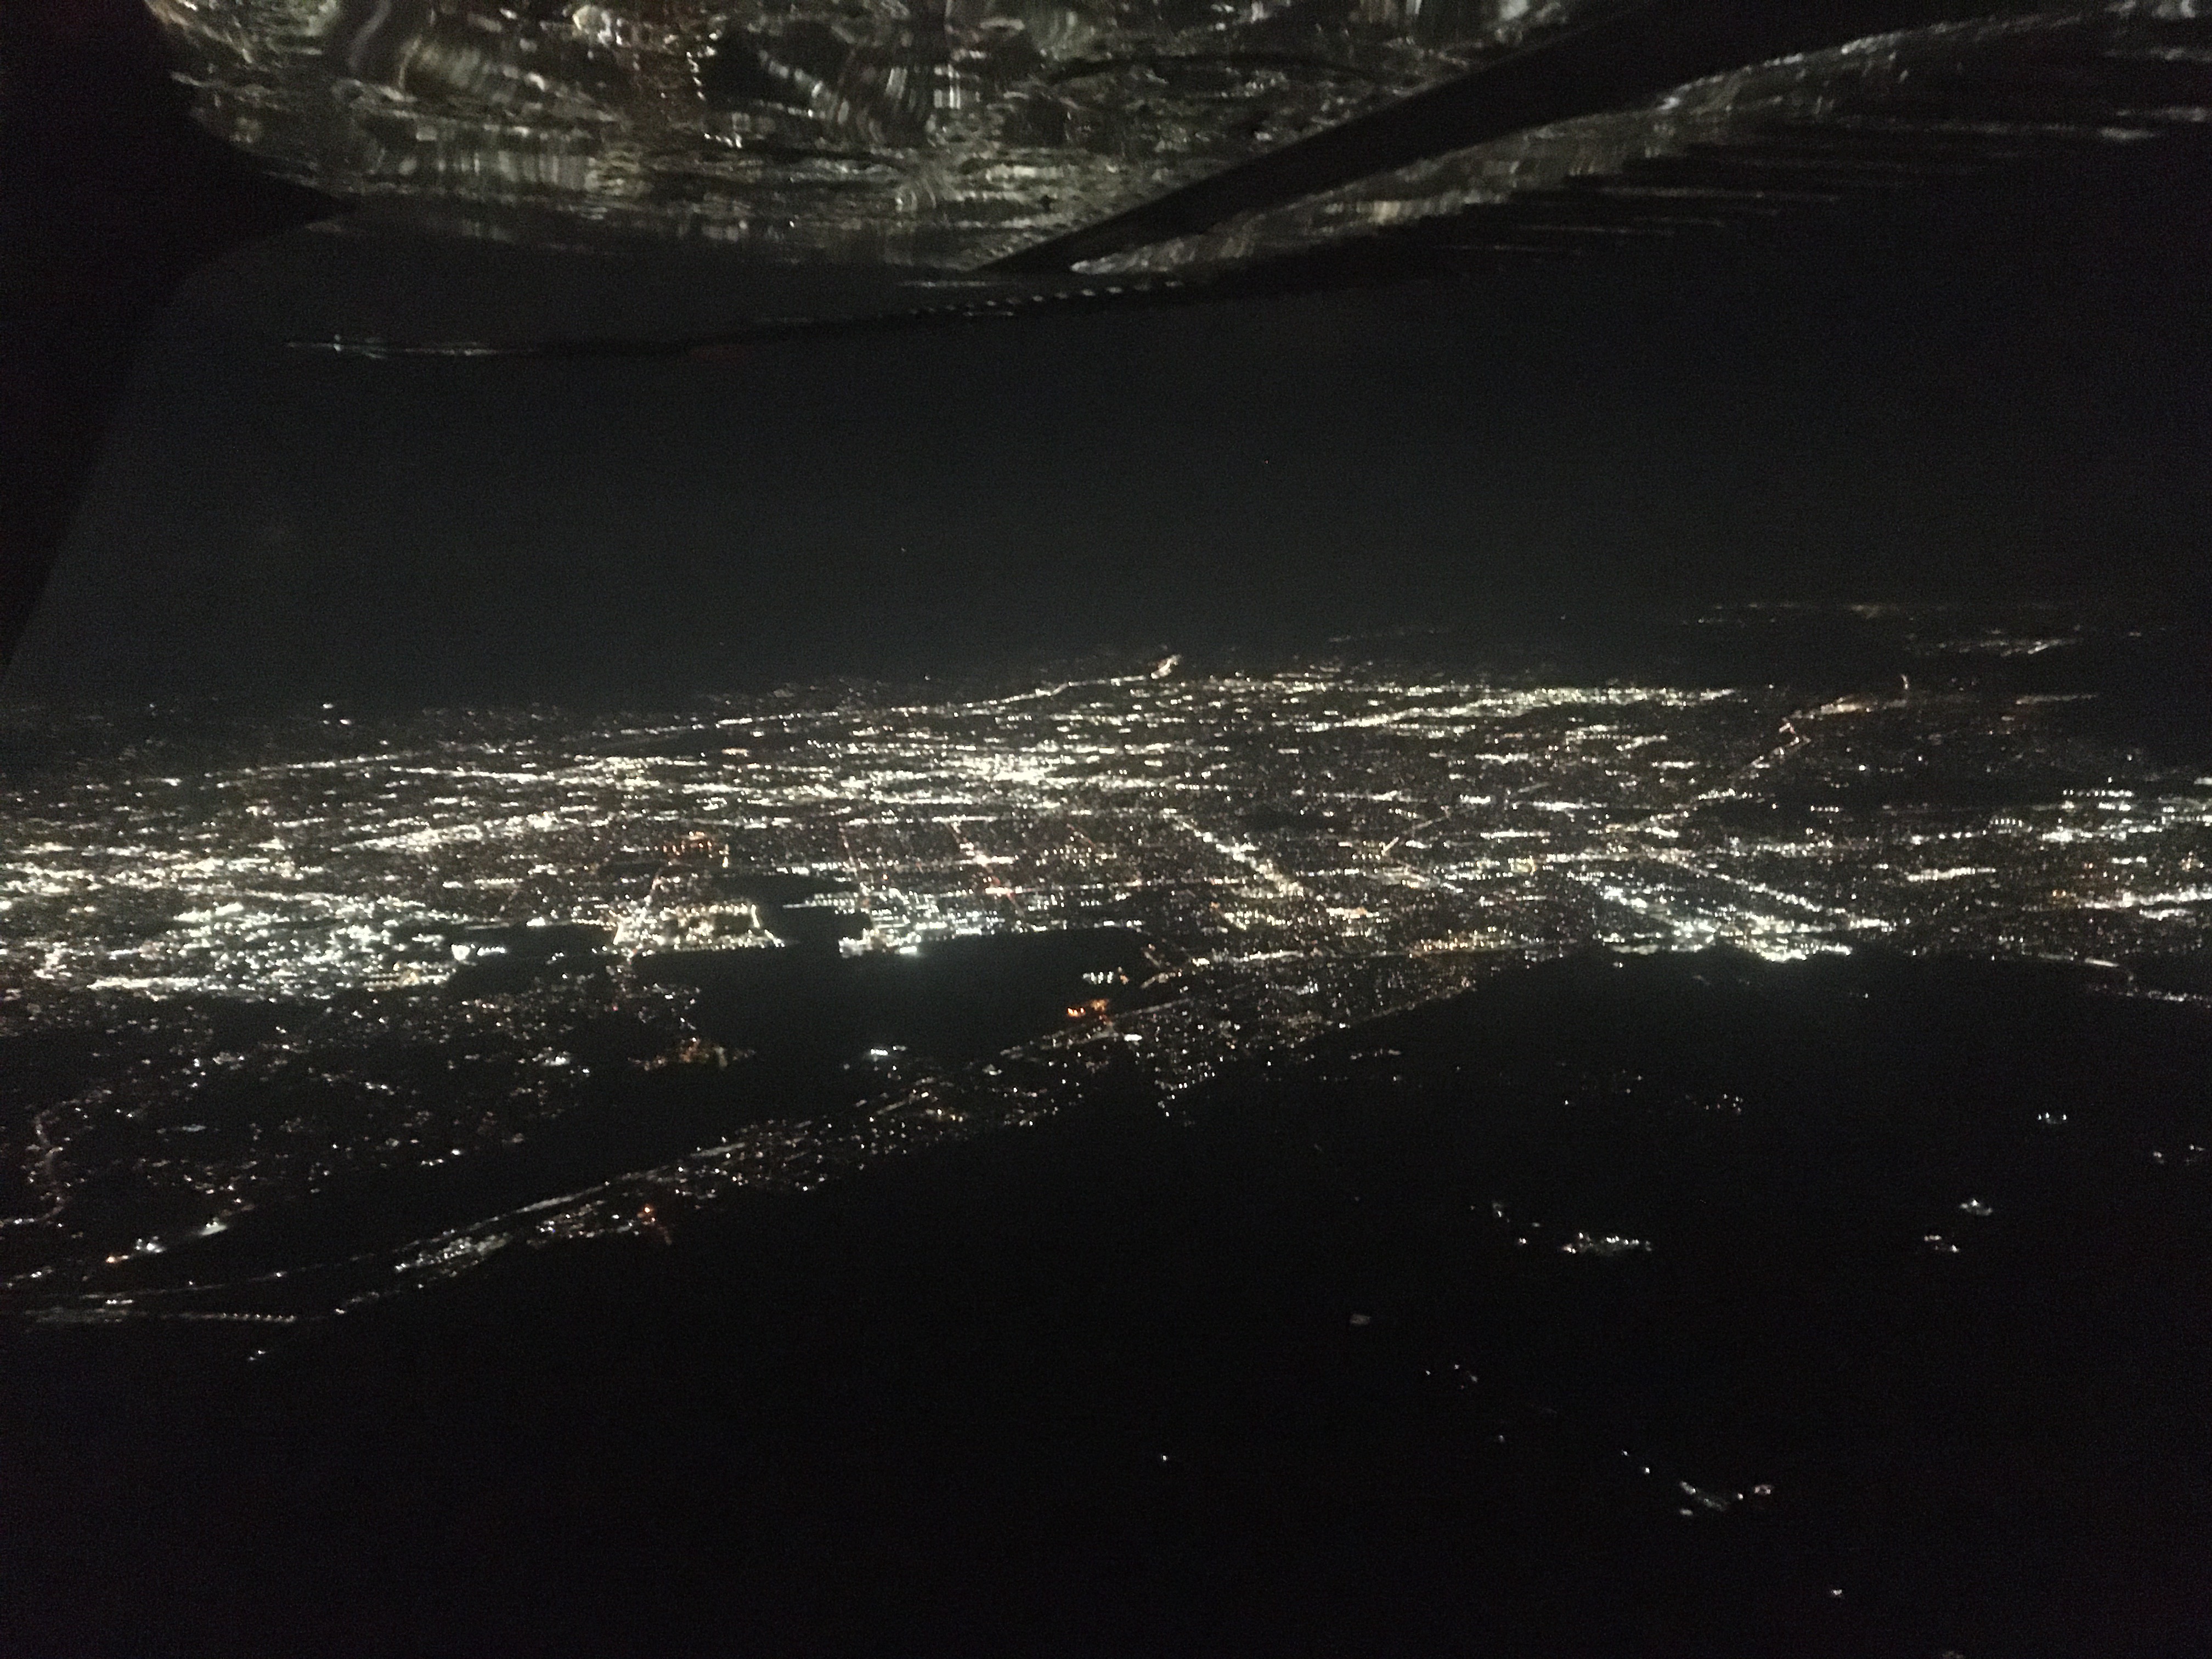 Aerial view of city lights at night, reflecting in the wing of the airplane